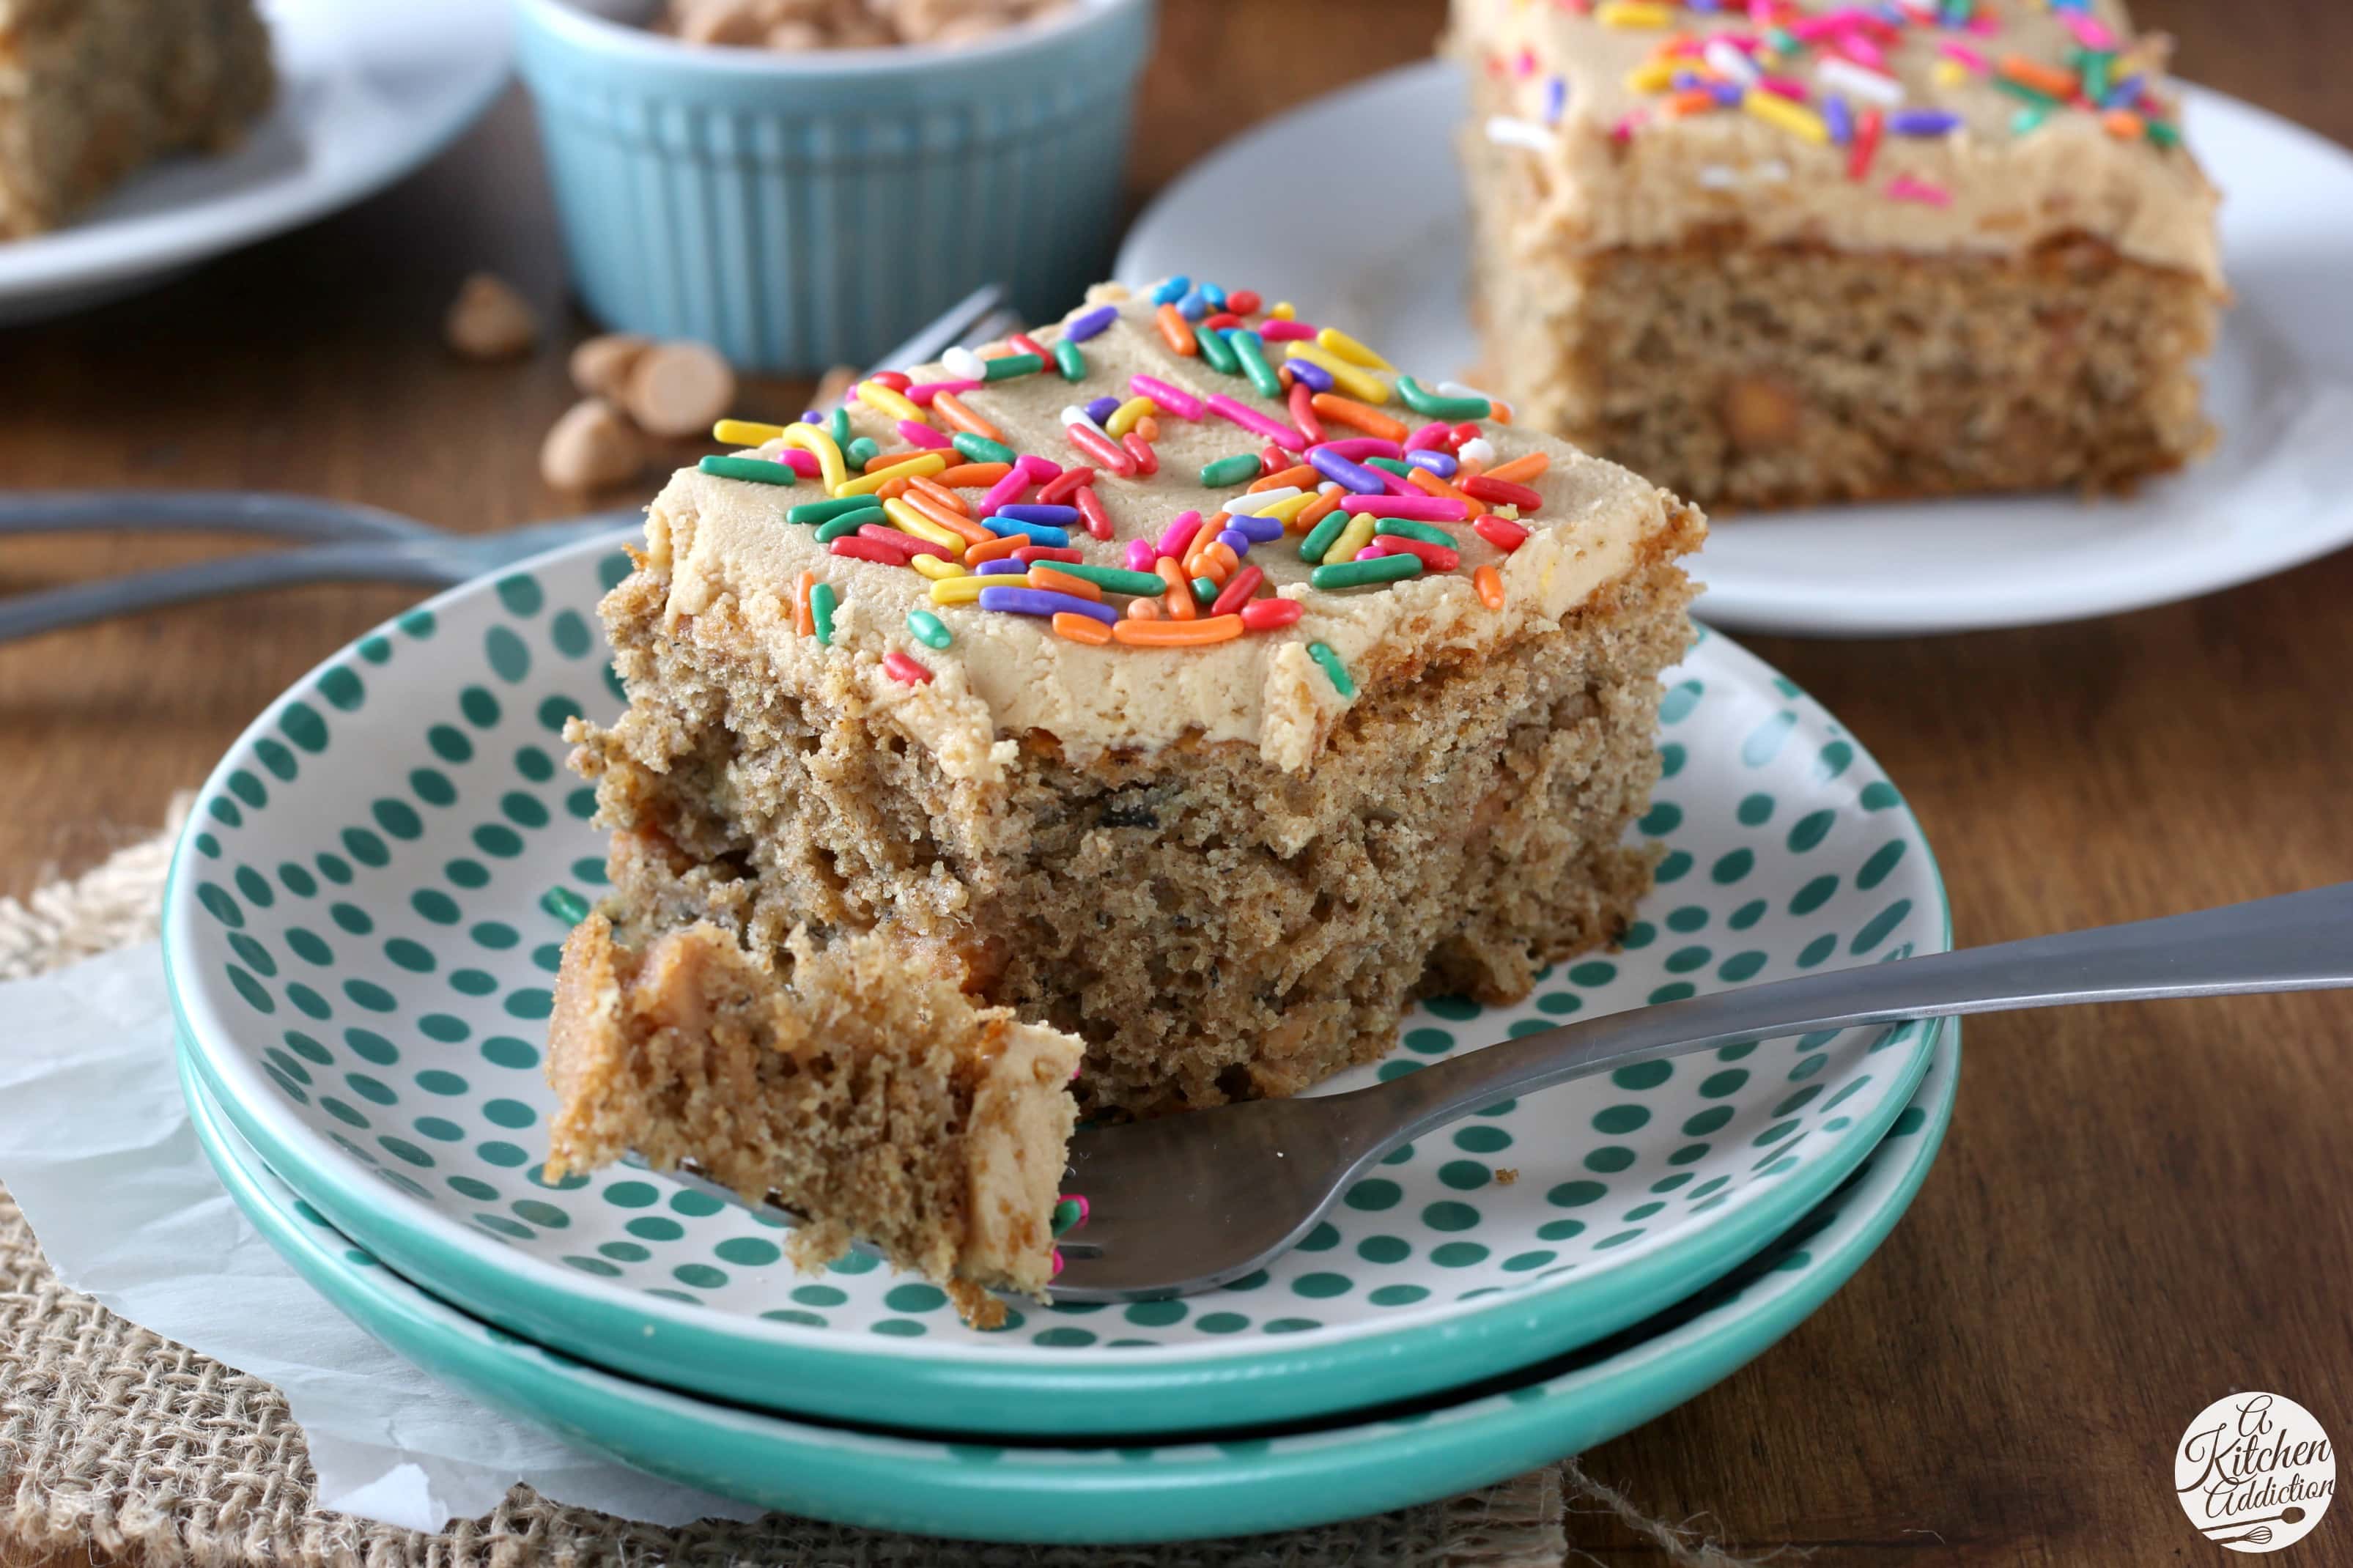 Easy Banana Cake with Peanut Butter Frosting Recipe from A Kitchen Addiction